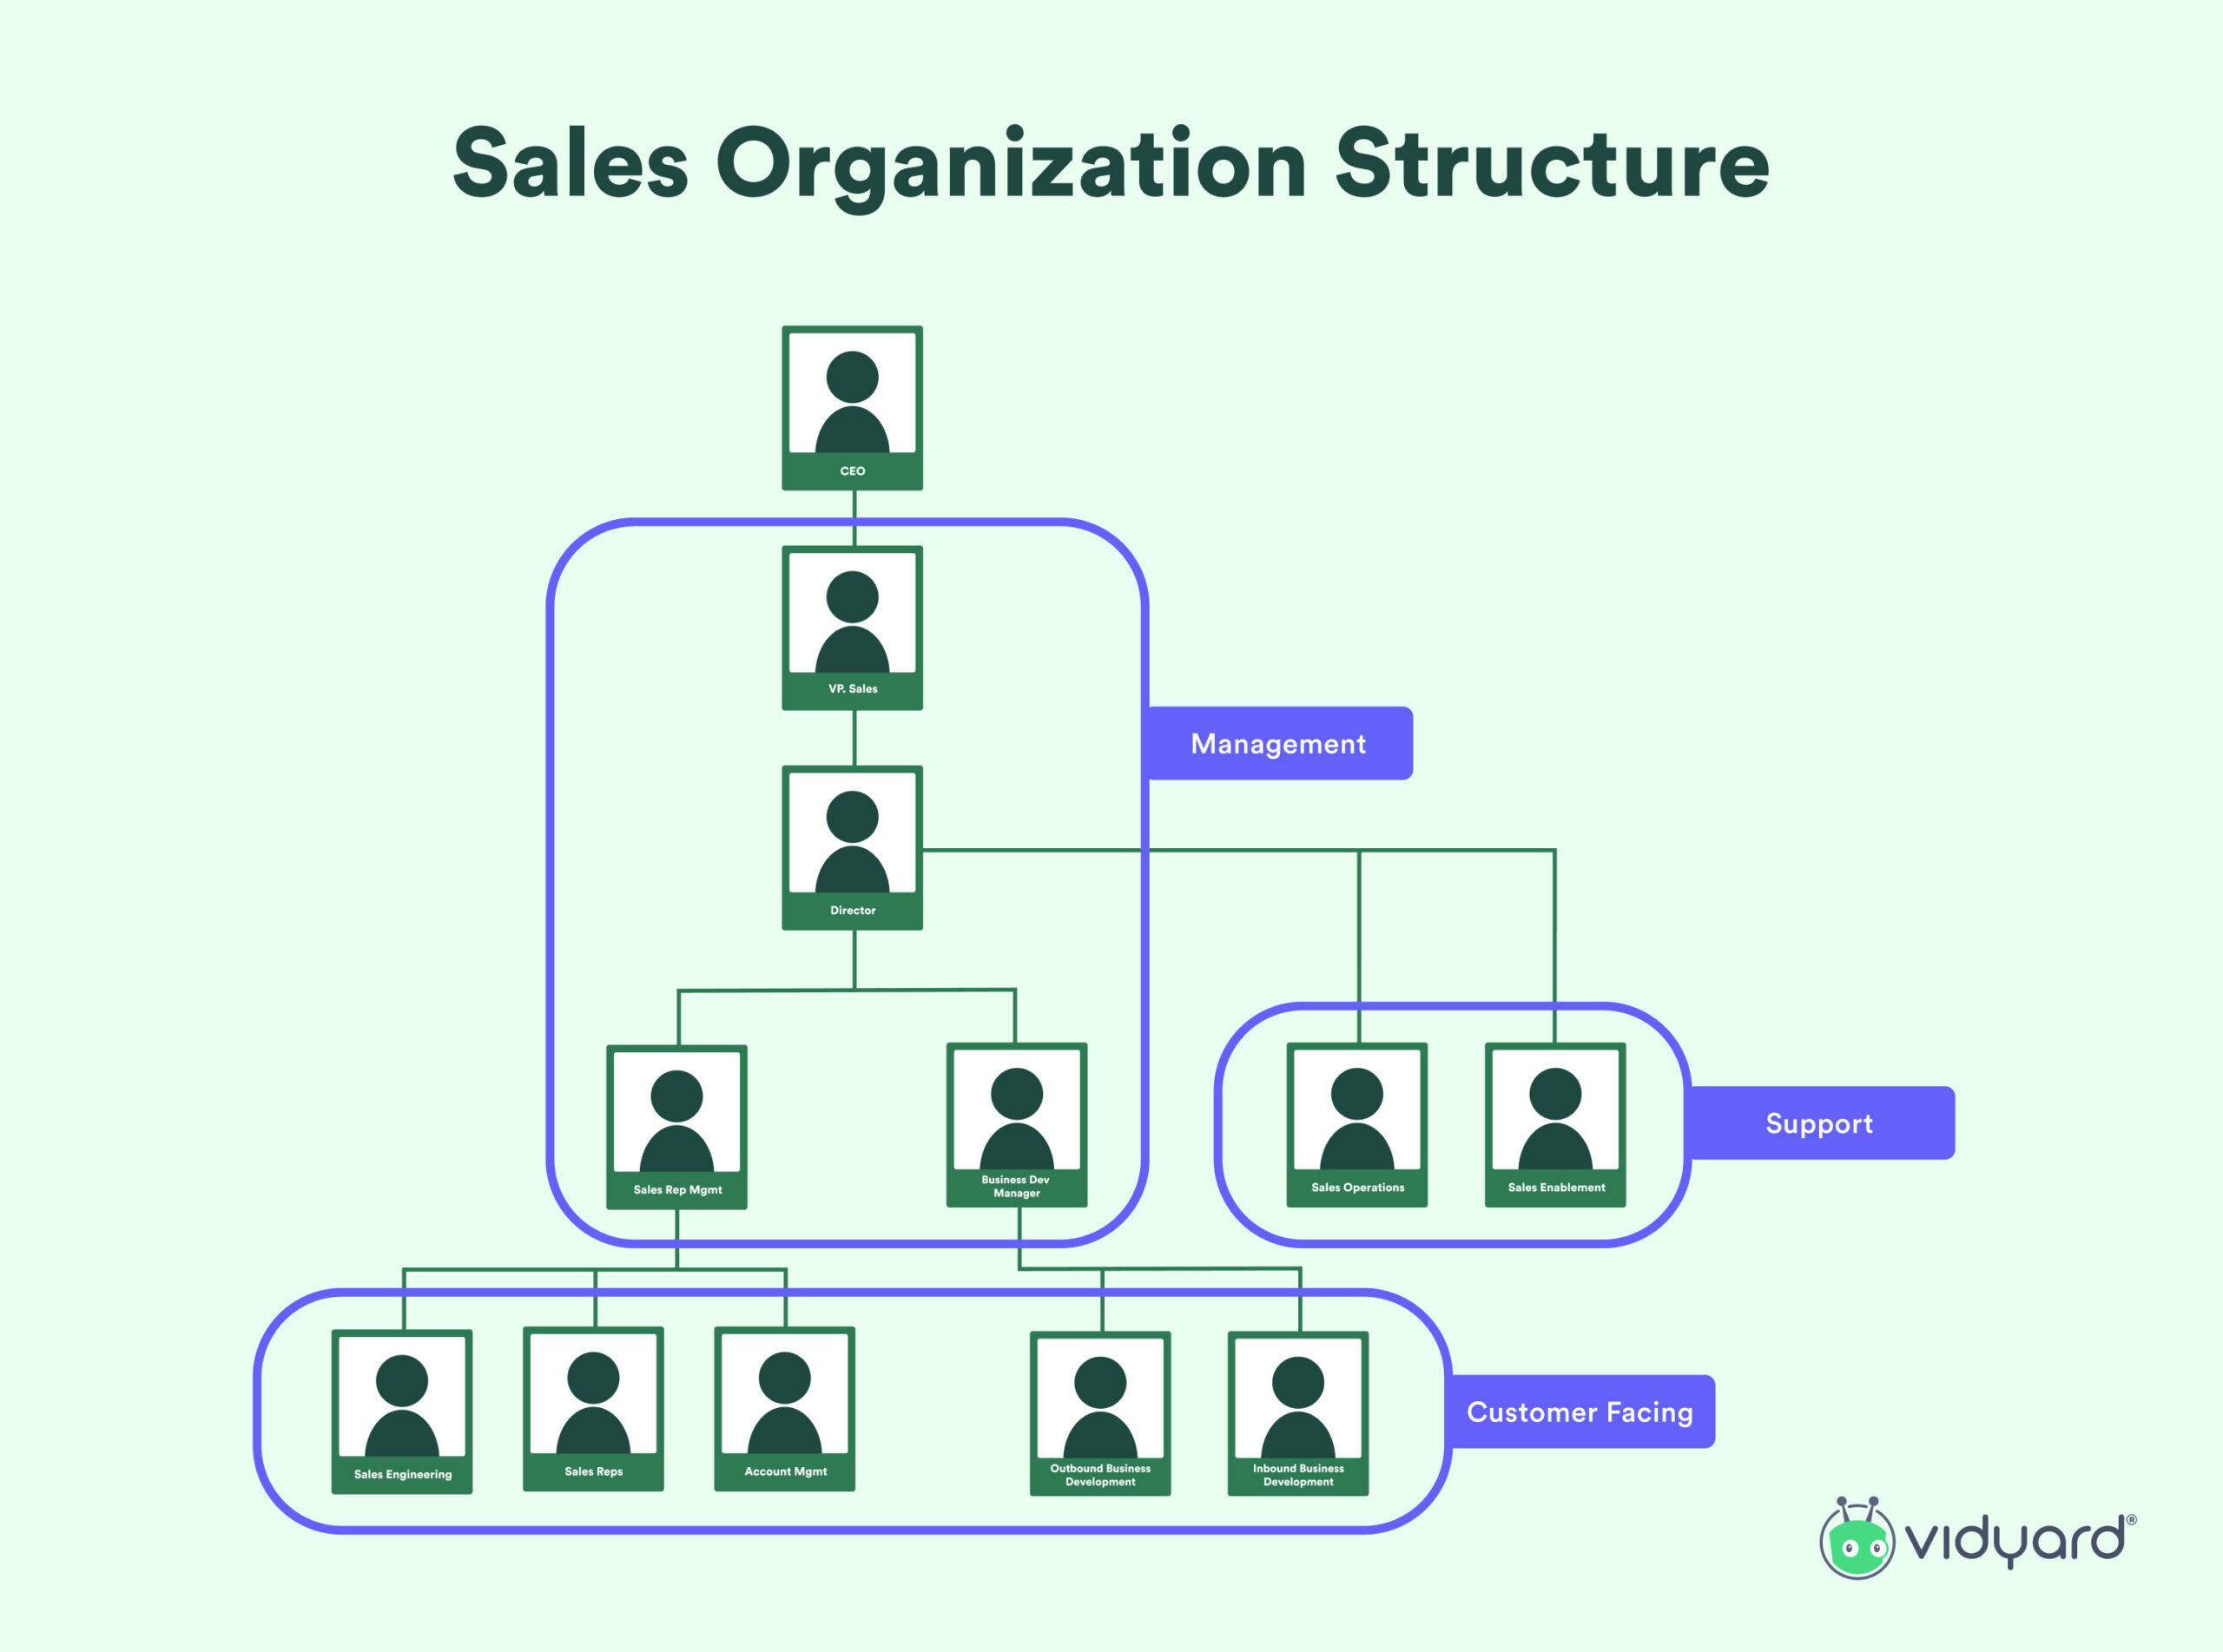 which assignment is correct for the sales organization